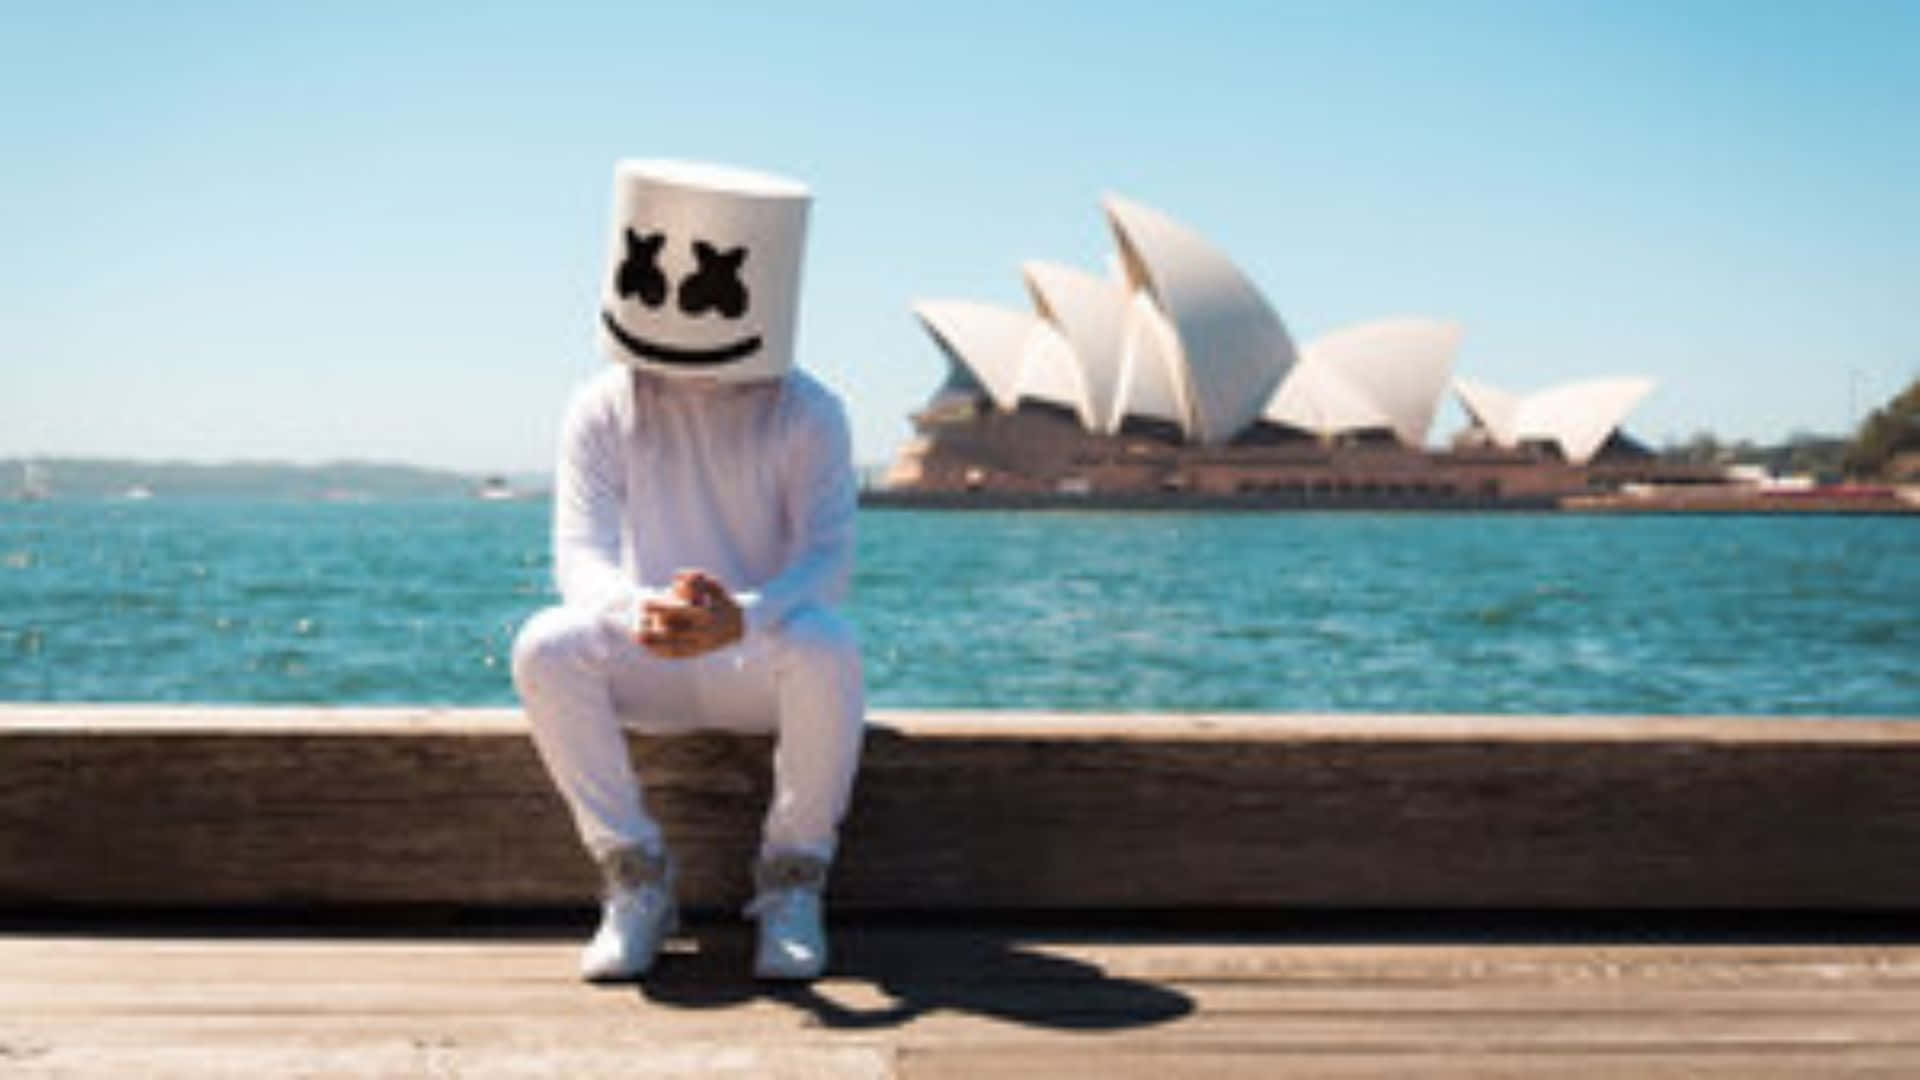 Bring joy to the world with the music of Marshmello!"